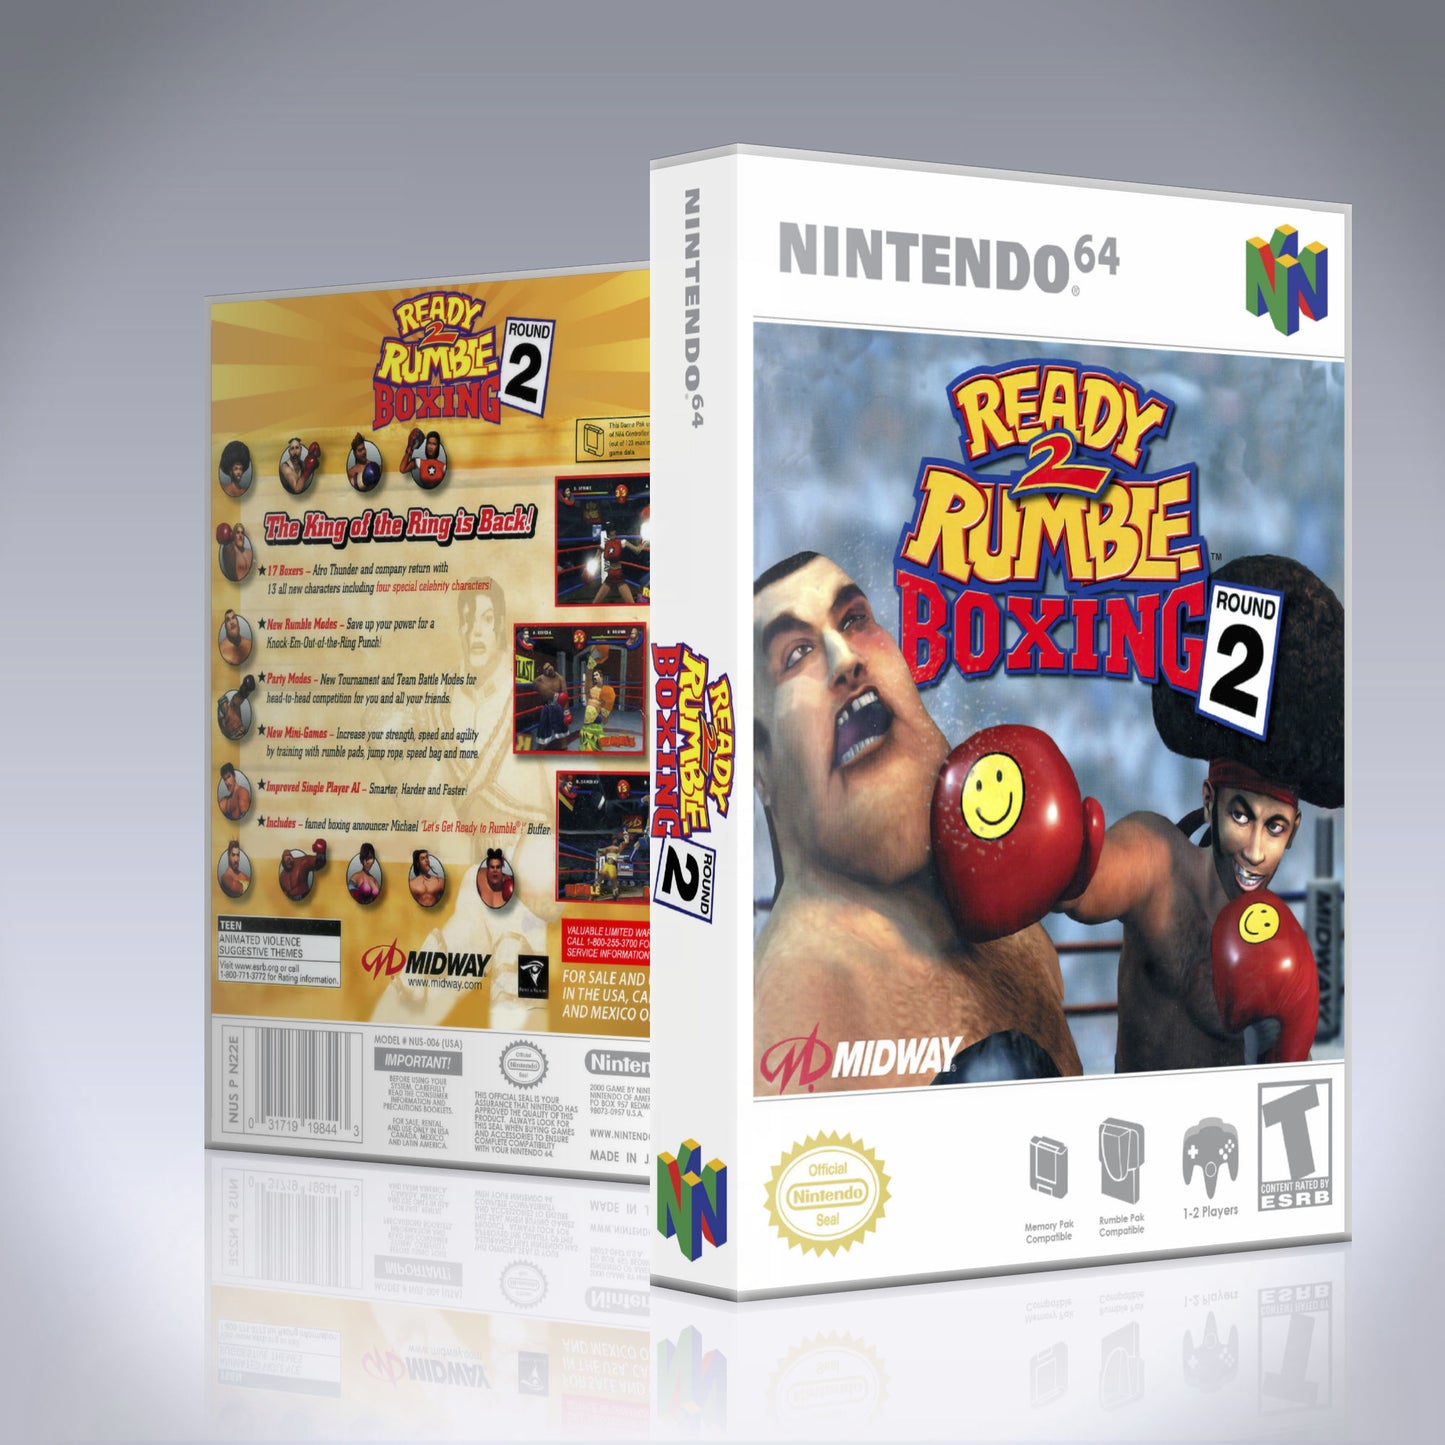 N64 Universal Game Case - NO GAME - Ready 2 Rumble Boxing - Round 2